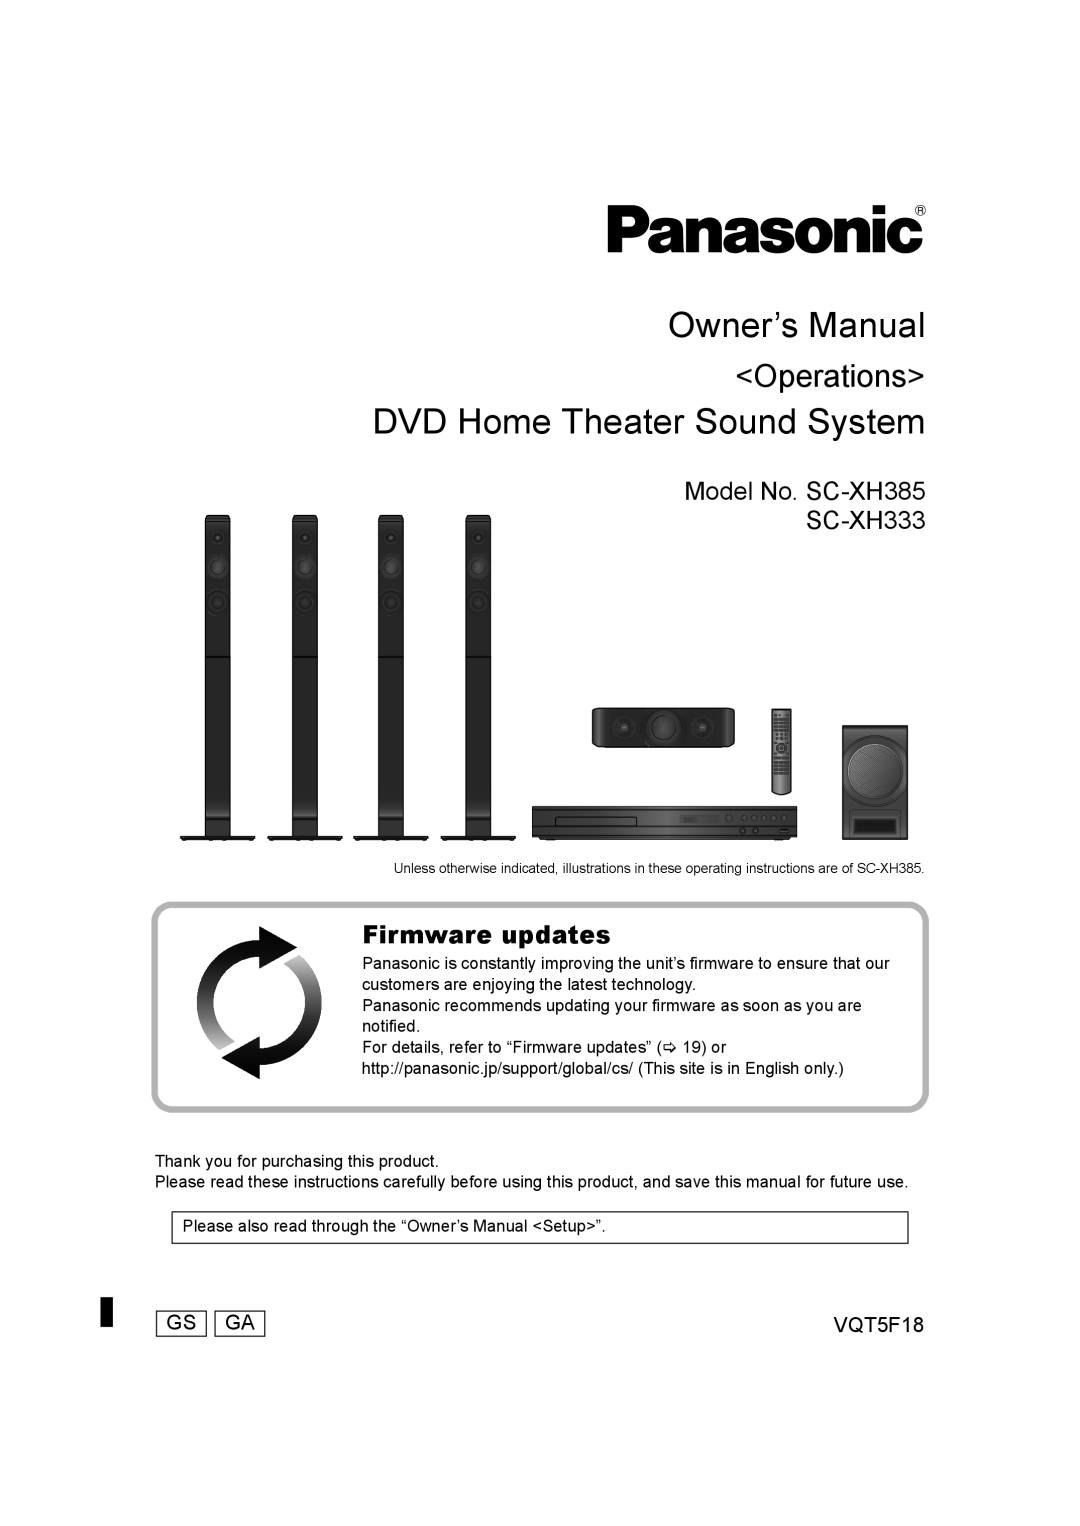 Panasonic SC-XH333, SC-XH385 owner manual Firmware updates, Gs Ga, VQT5F18, DVD Home Theater Sound System, Operations 